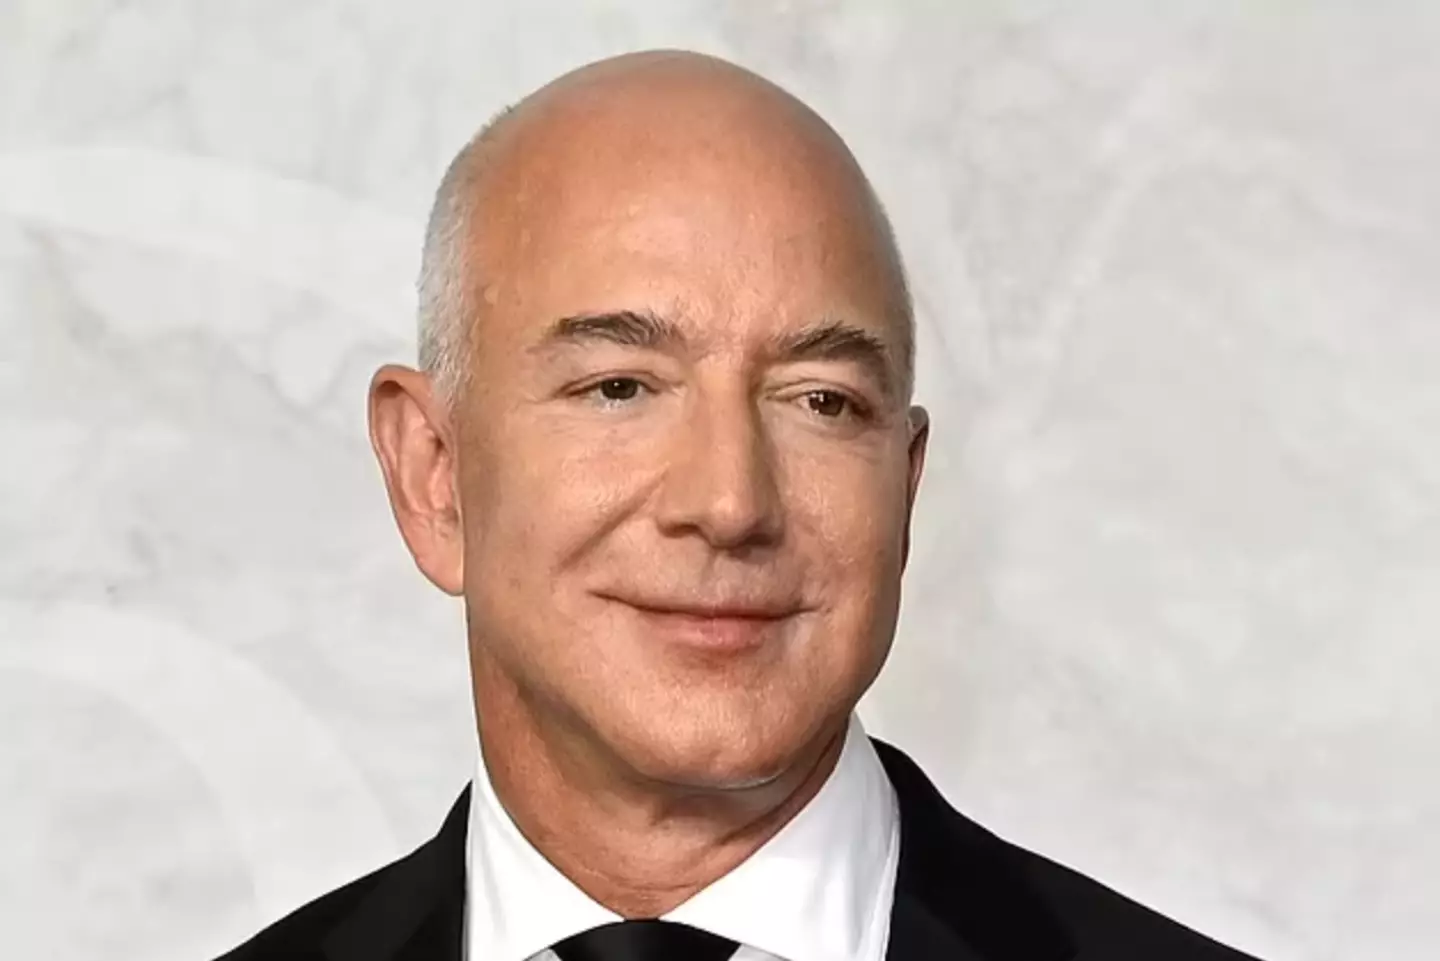 Pictured is the face of Jeff Bazos, one of the richest men in the world.